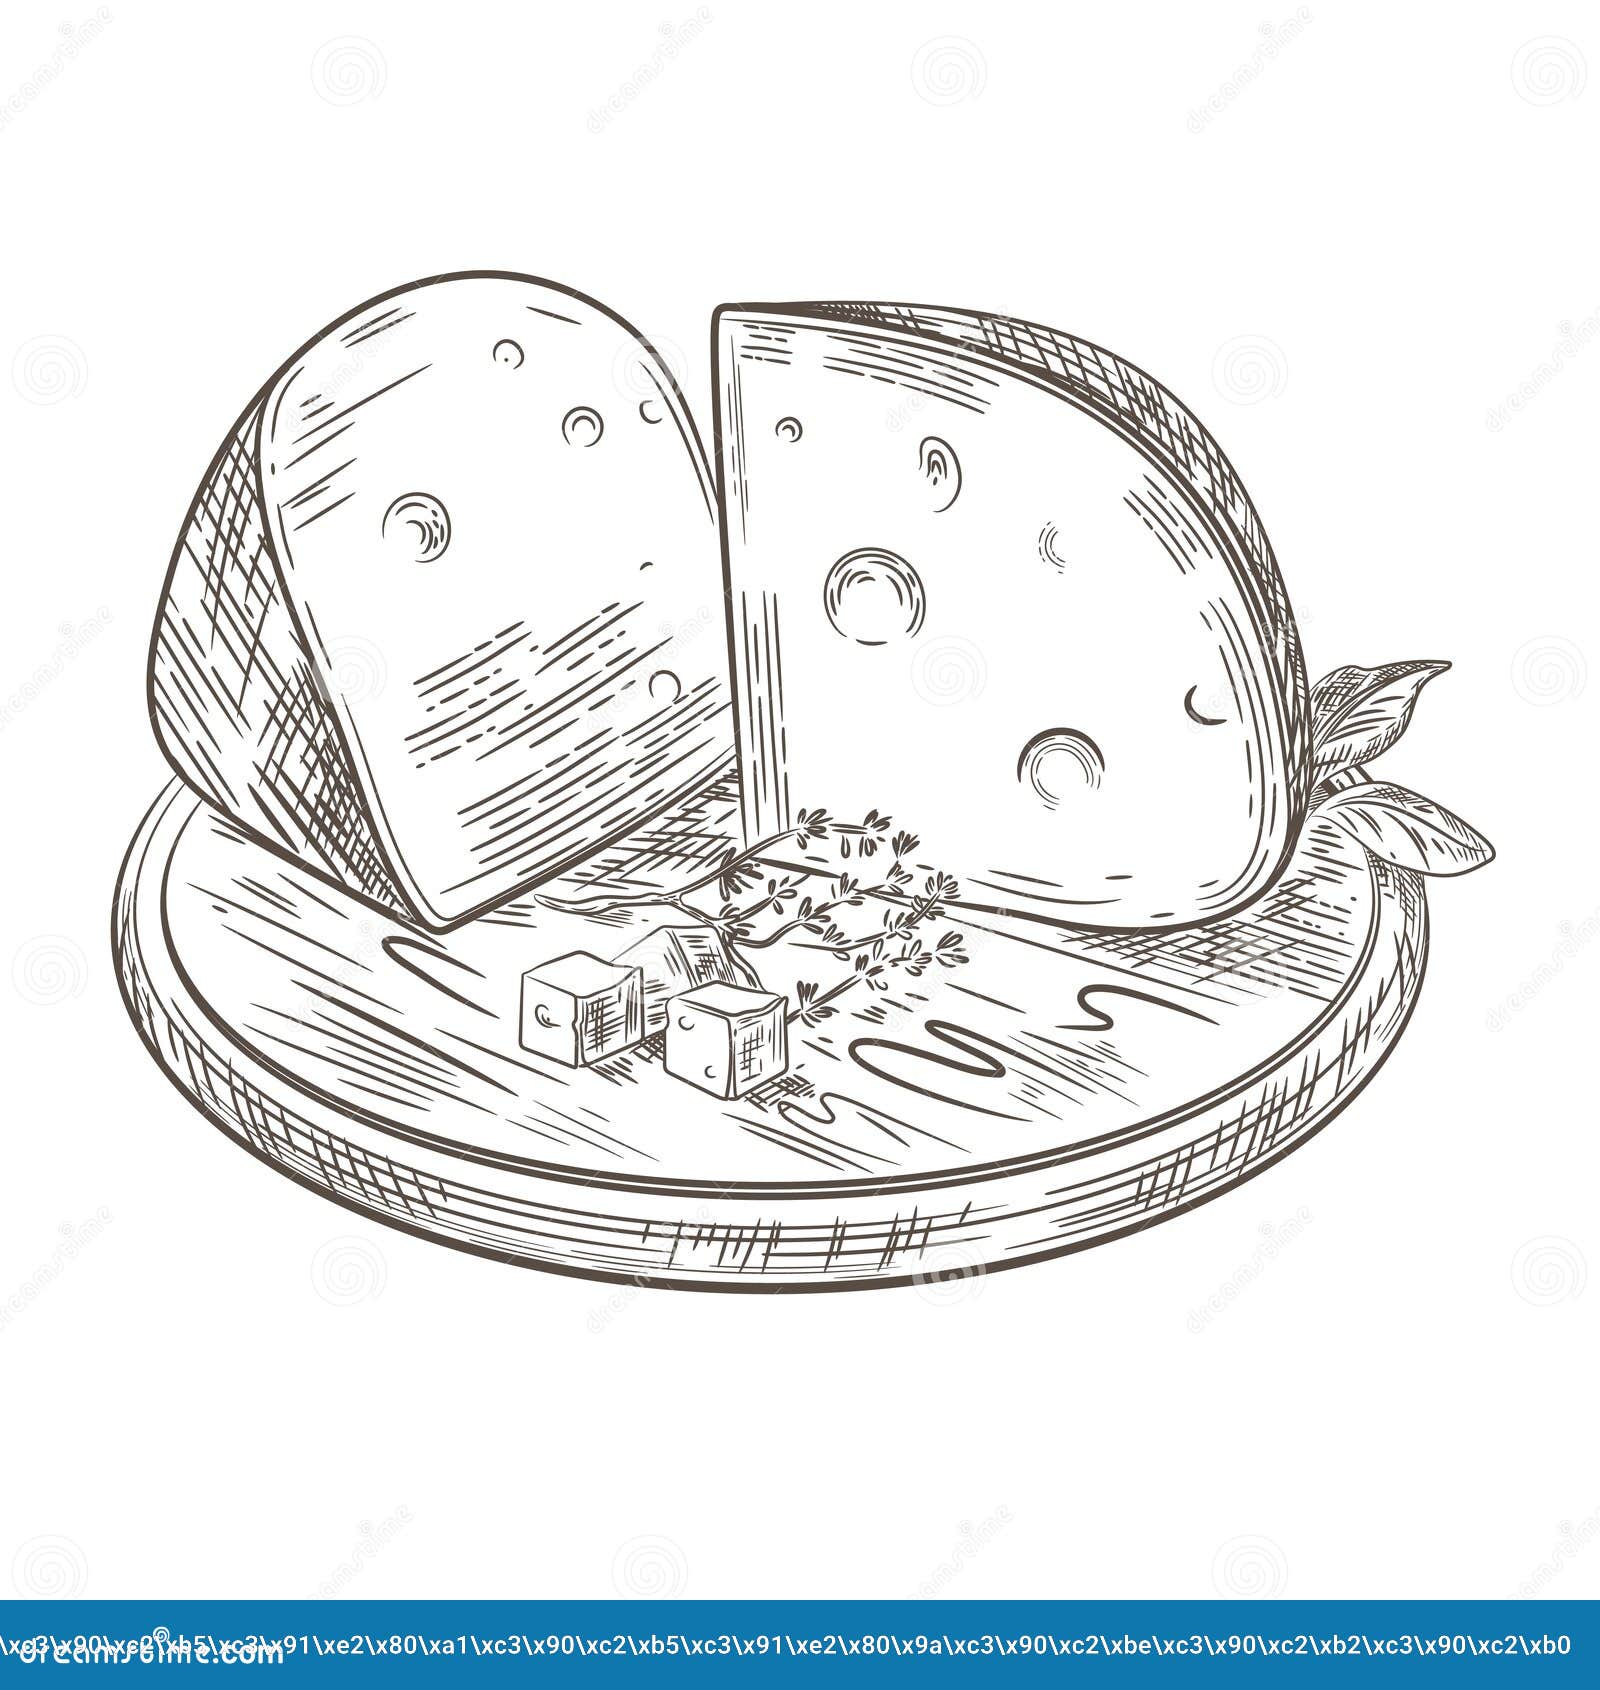 https://thumbs.dreamstime.com/z/cheese-lies-wooden-cutting-board-vector-retro-illustration-vintage-158064207.jpg